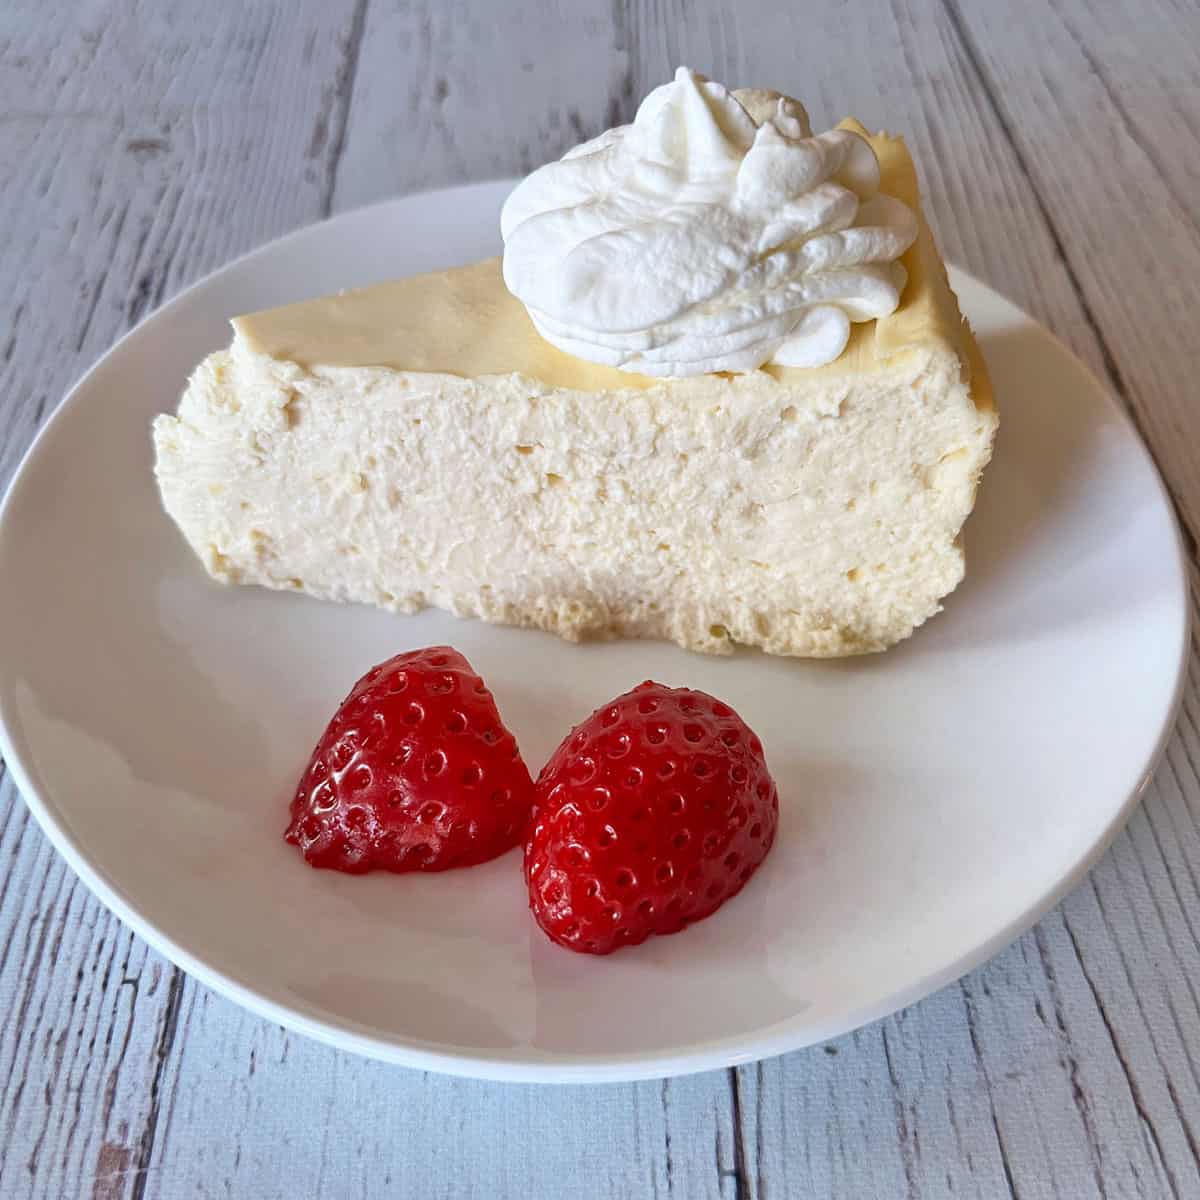 Keto whipped cream is used as a topping for a slice of keto cheesecake.